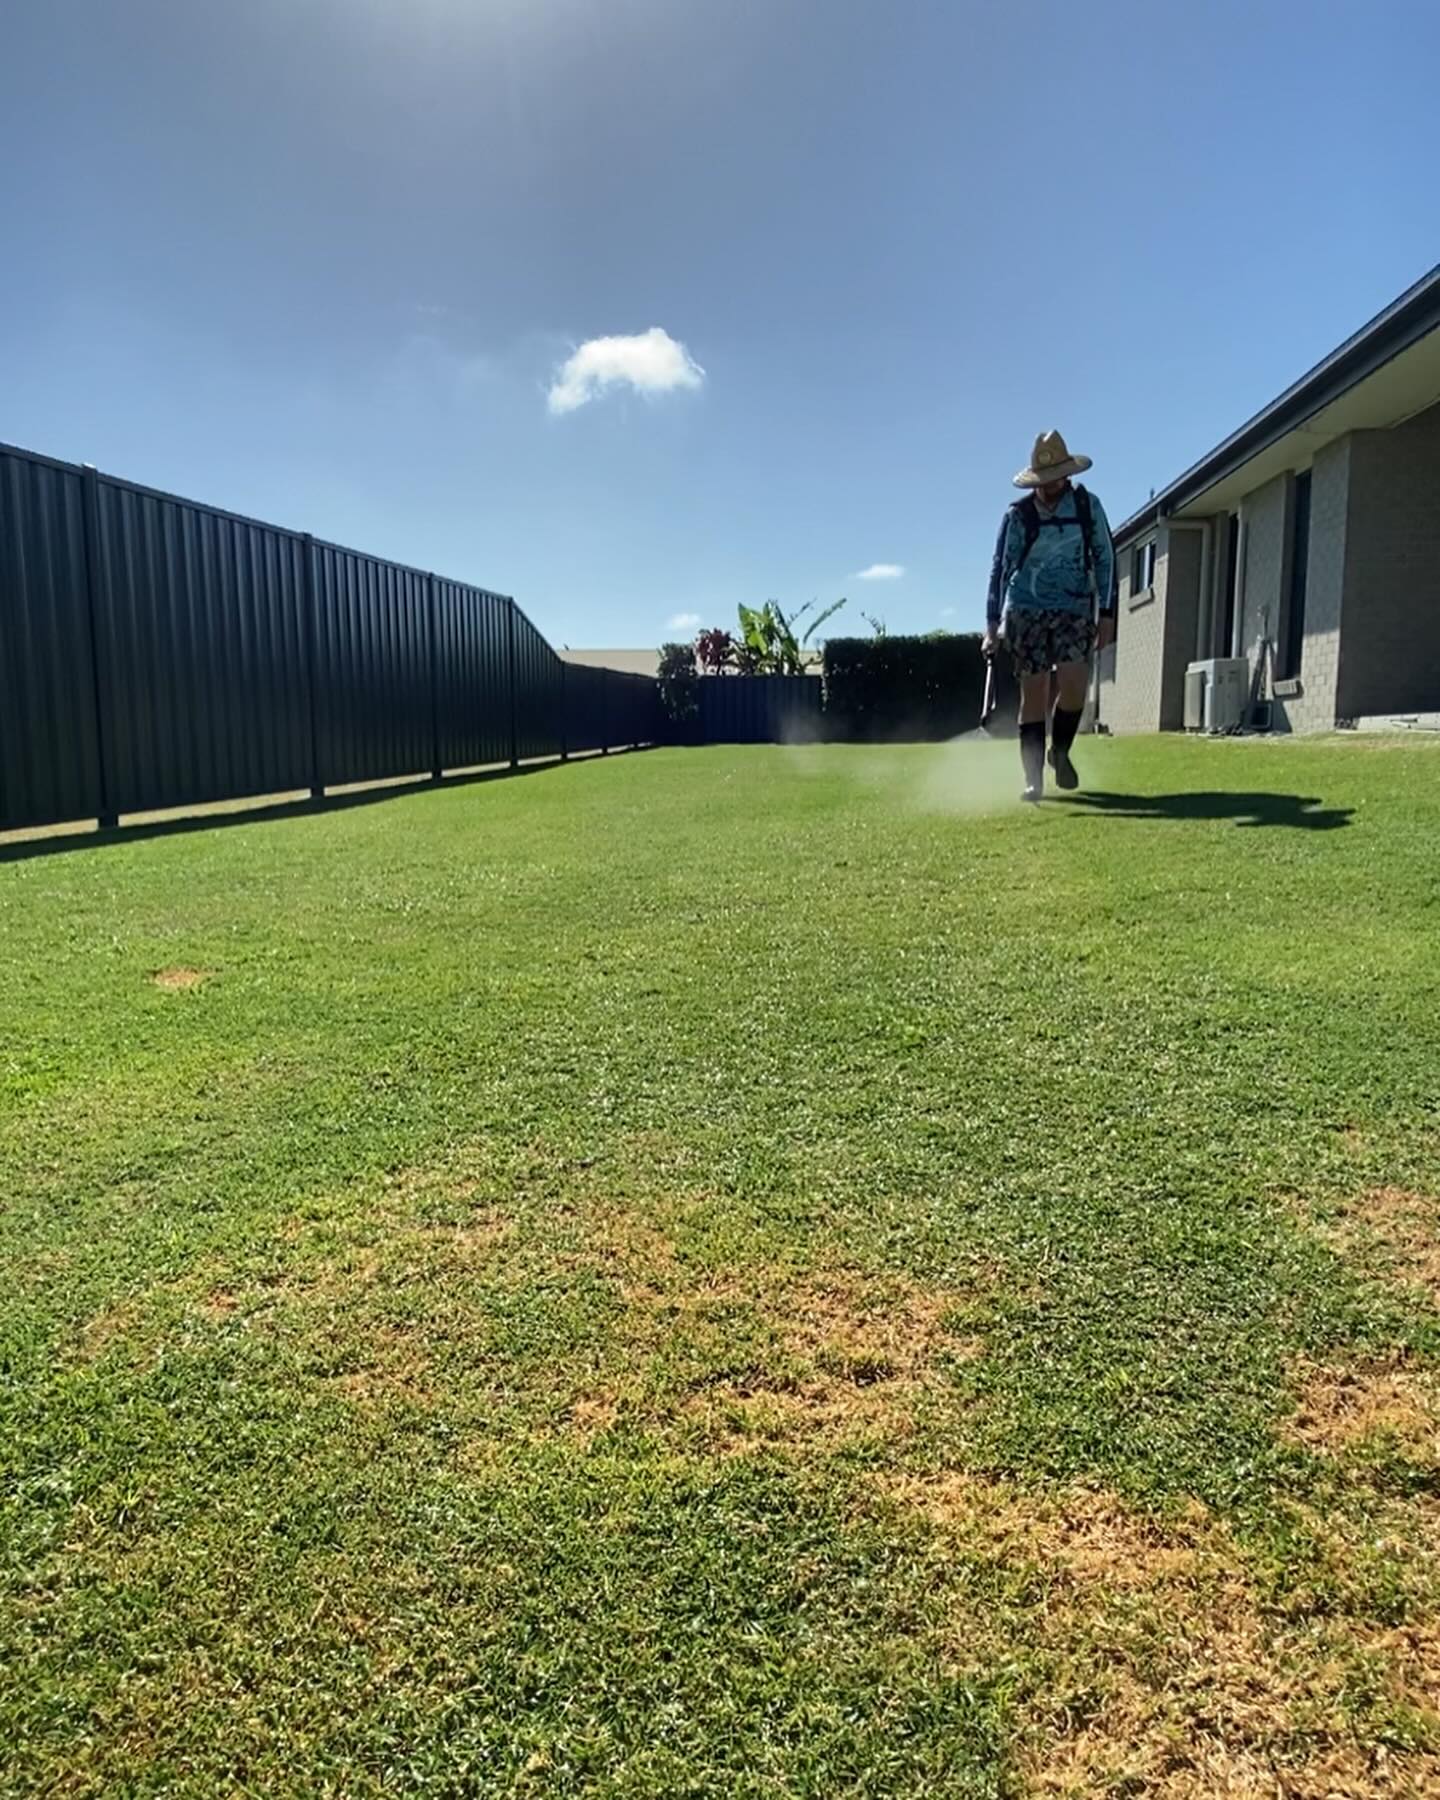 ⛳ Beautiful afternoon on the back yard patch 🎄 Spraying plantdoctorau goodness made easy with ryobiau 👌🏻💚 Back yard reno is so close to popping! Can’t believe this thing is only 16 days post Reno, smashing it 💥✨

#ryobimade #goals #lawngoals #lawndad #ryobi #plantdoctor #lawncare #lawn #lawnmaintenance #lawnlove #spraying #challenge